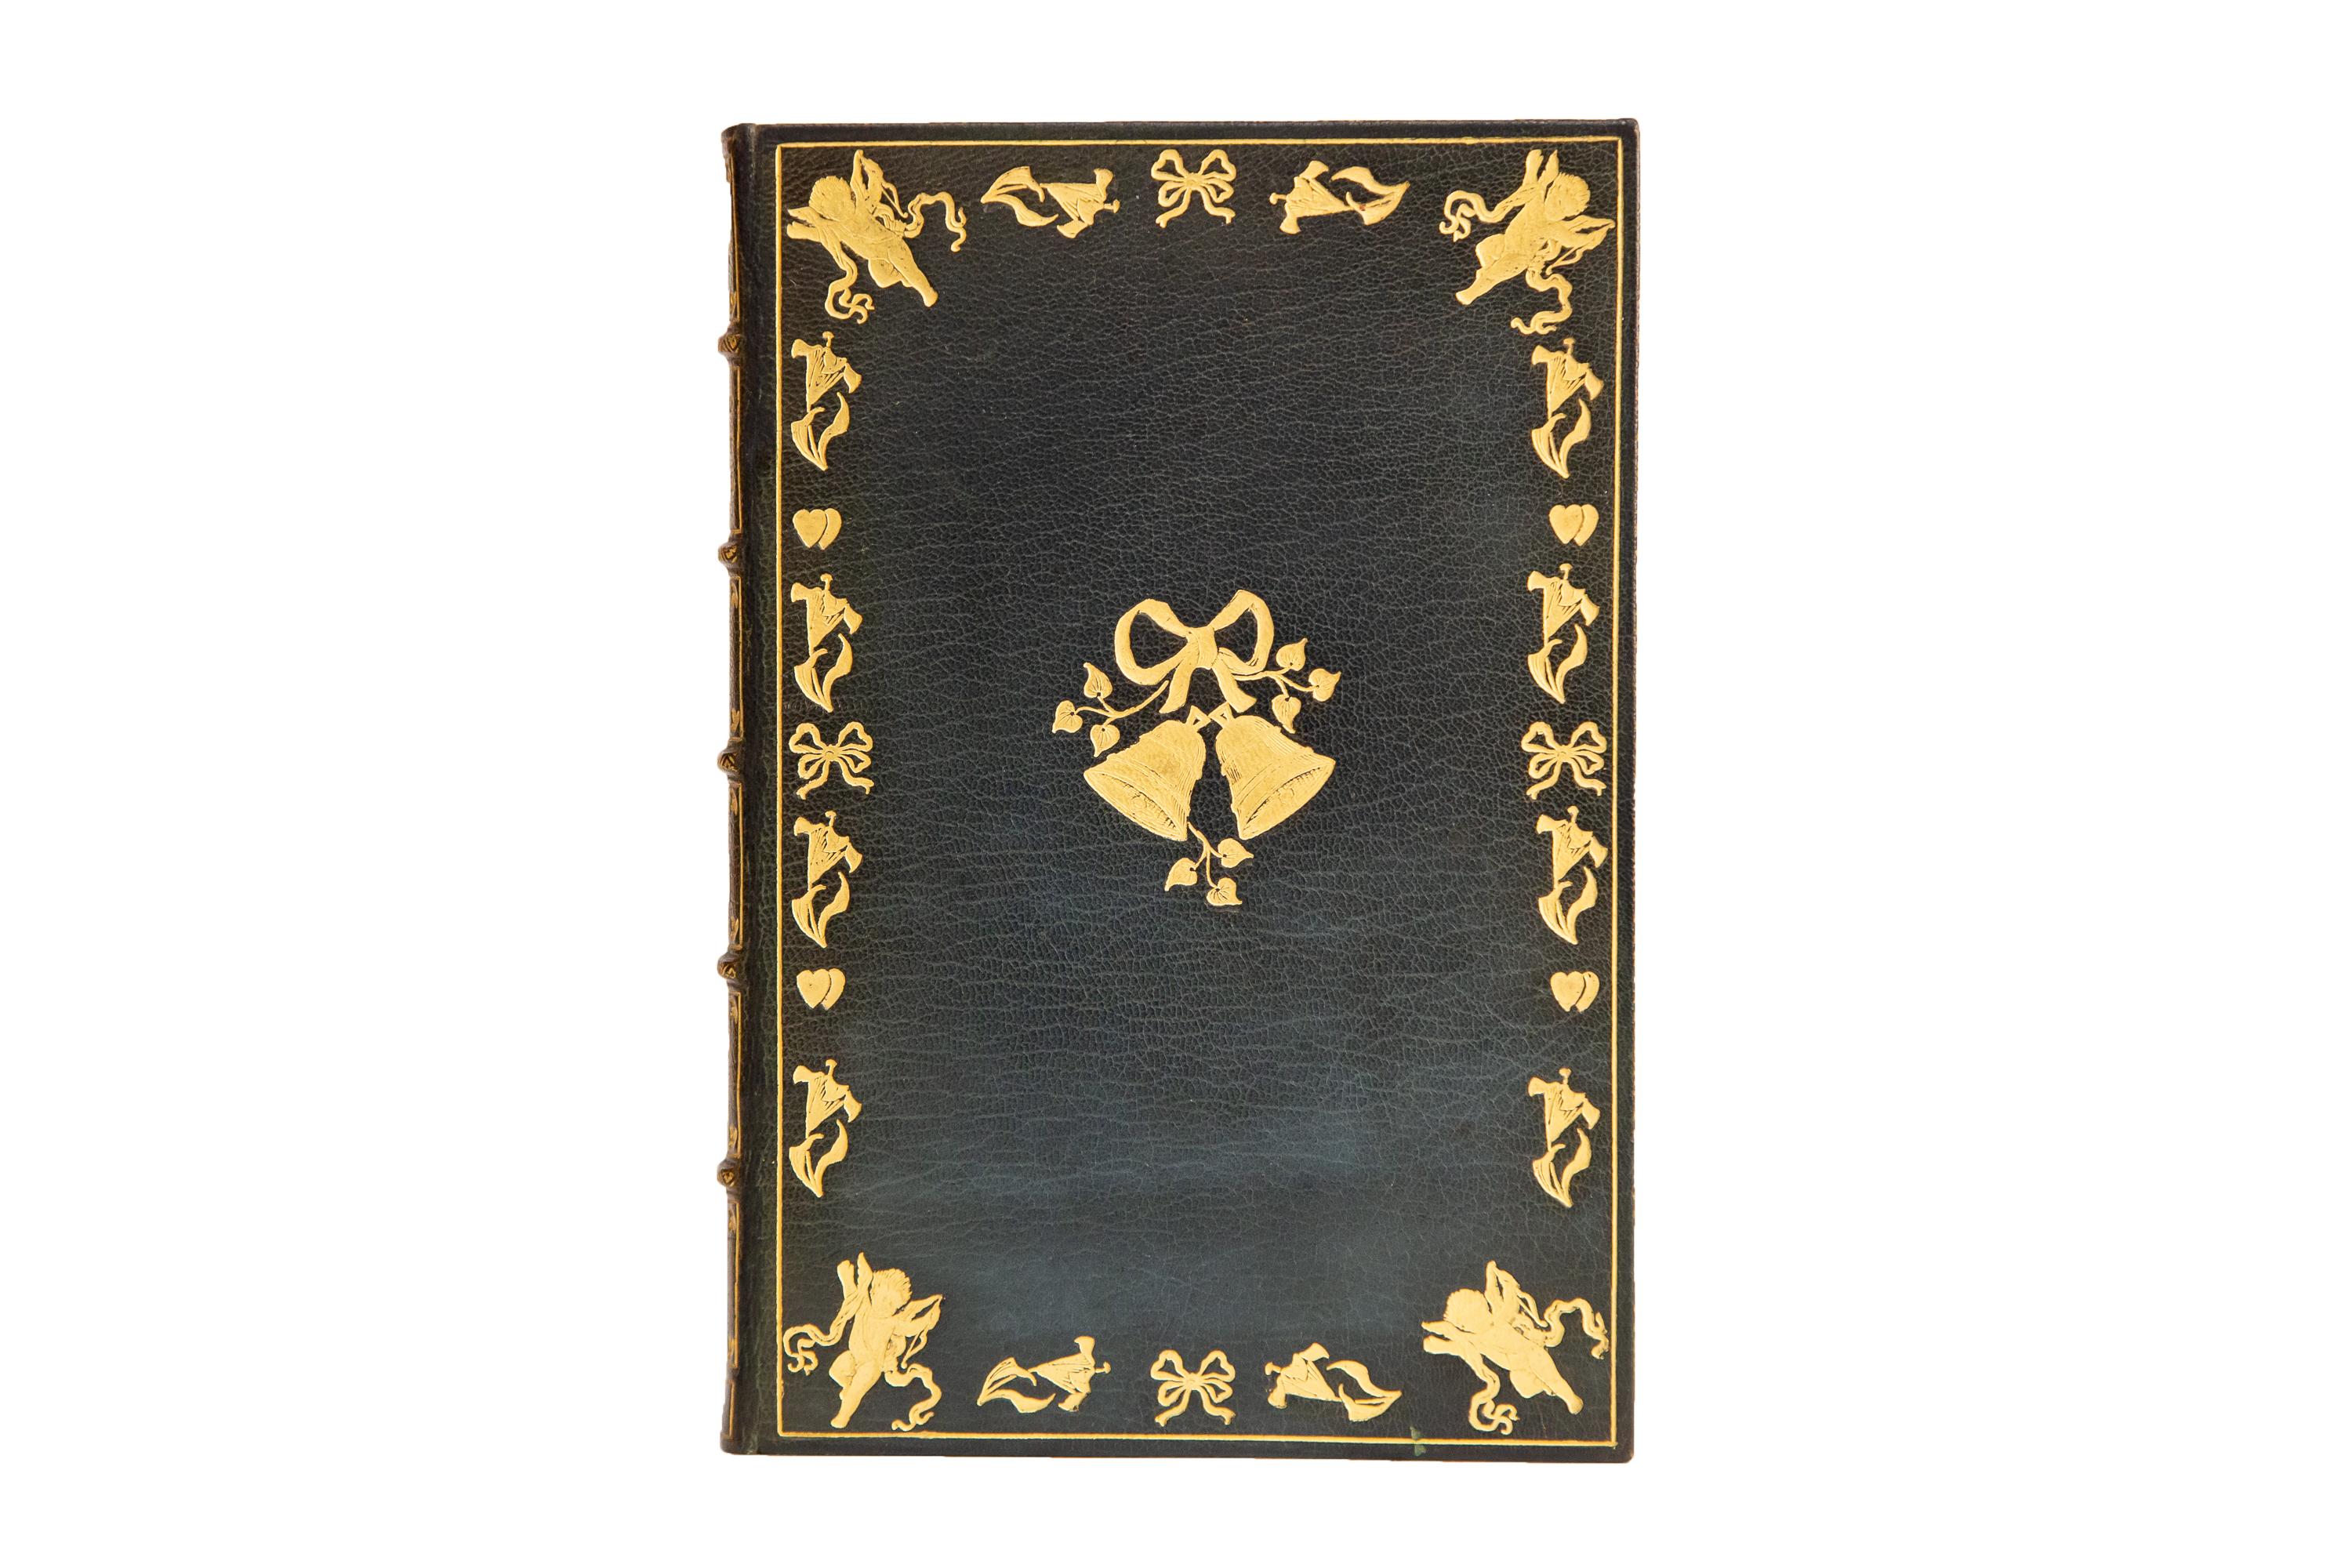 1 Volume. Hannen Foss, And So We Got Married. Bound in full green morocco with the covers displaying all sorts of gilt-tooled marital details including a central large set of wedding bells, depictions of Cupid in each corner, hearts, and flowers.